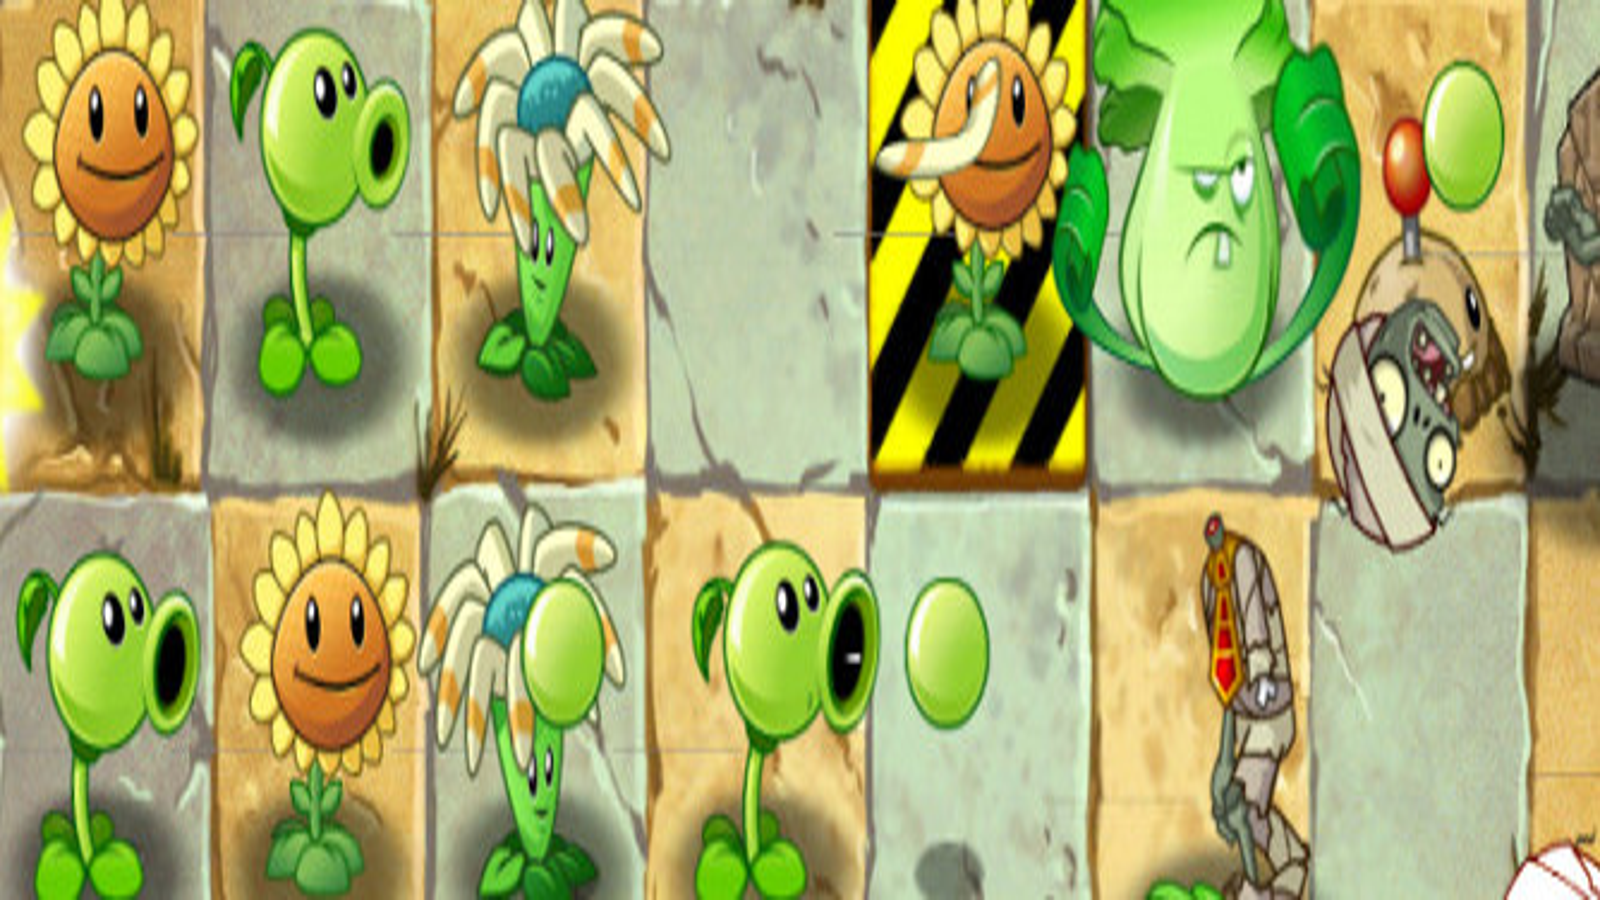 Plants vs. Zombies™ 2 - Apps on Google Play